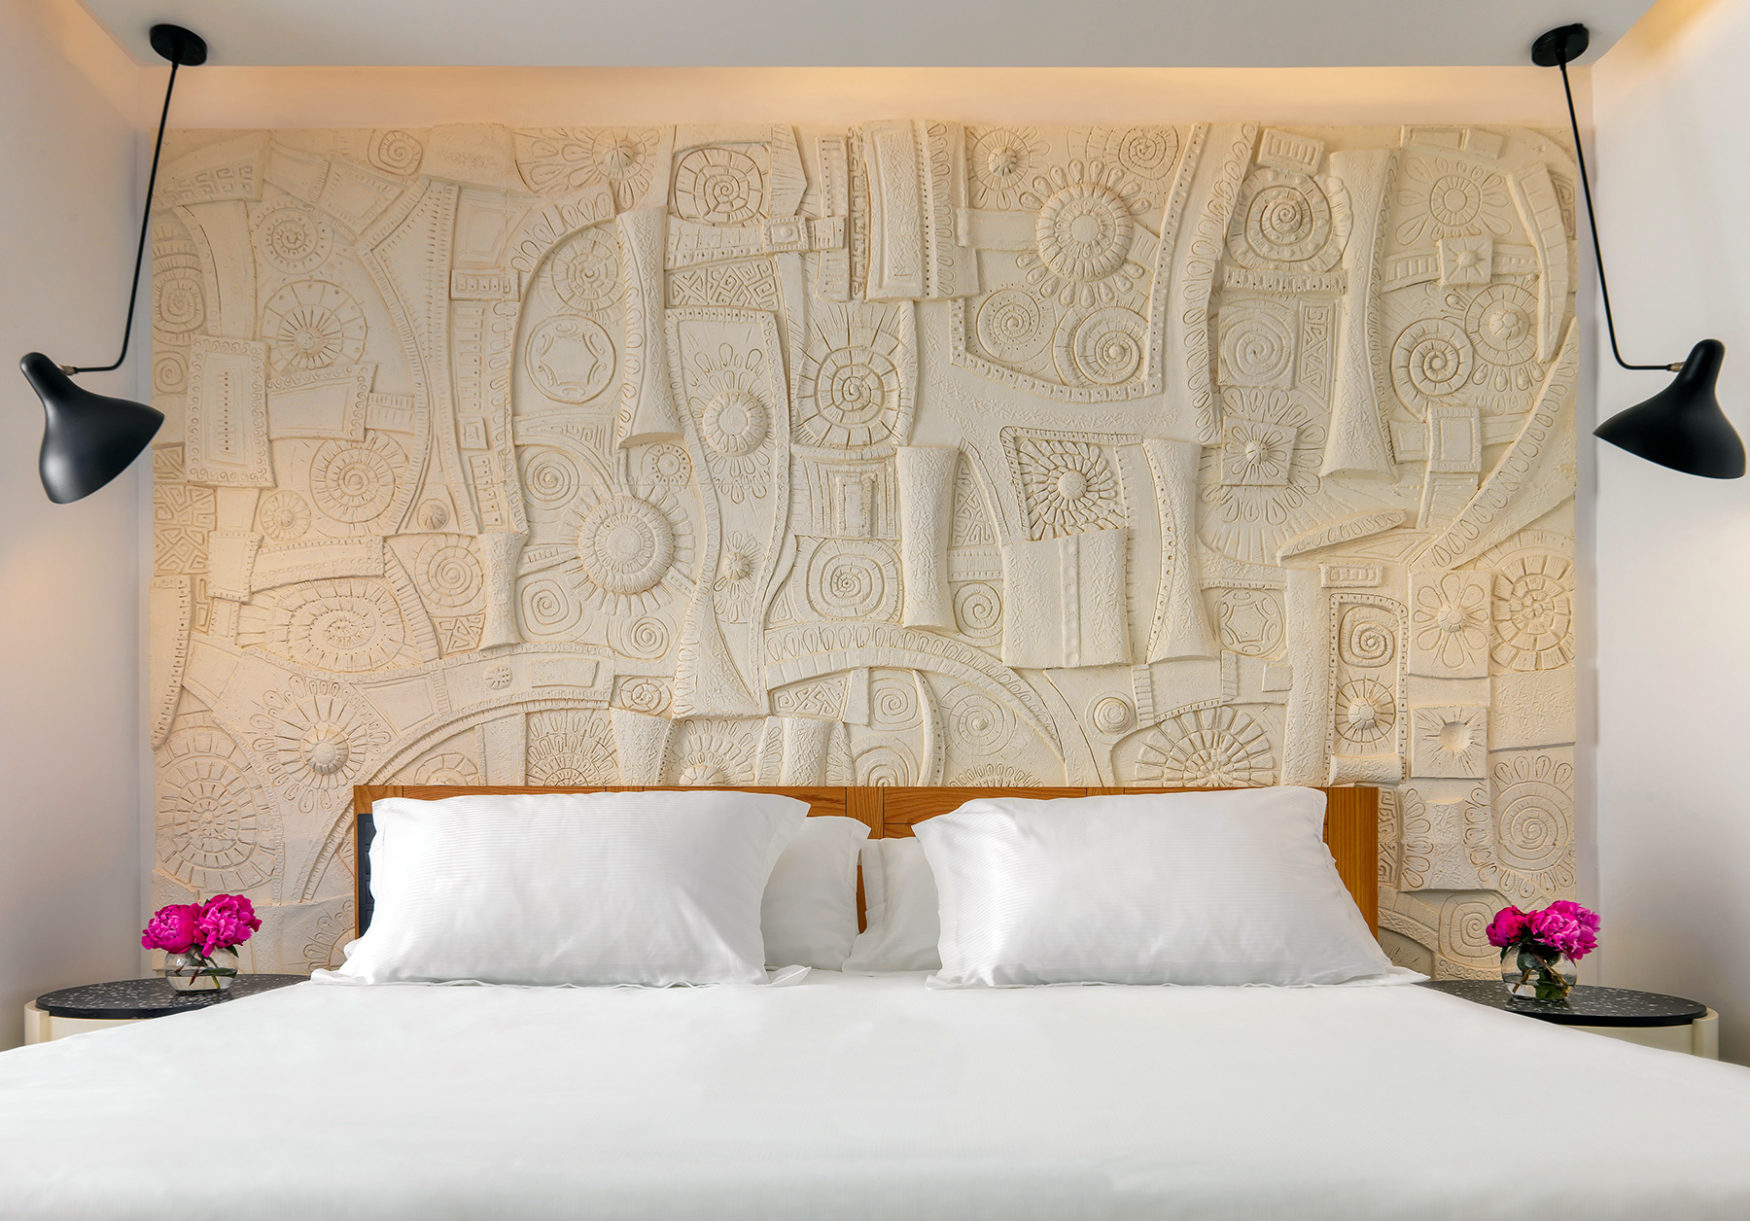 DECORATIVE WALL SOLUTIONS FOR HOTELS